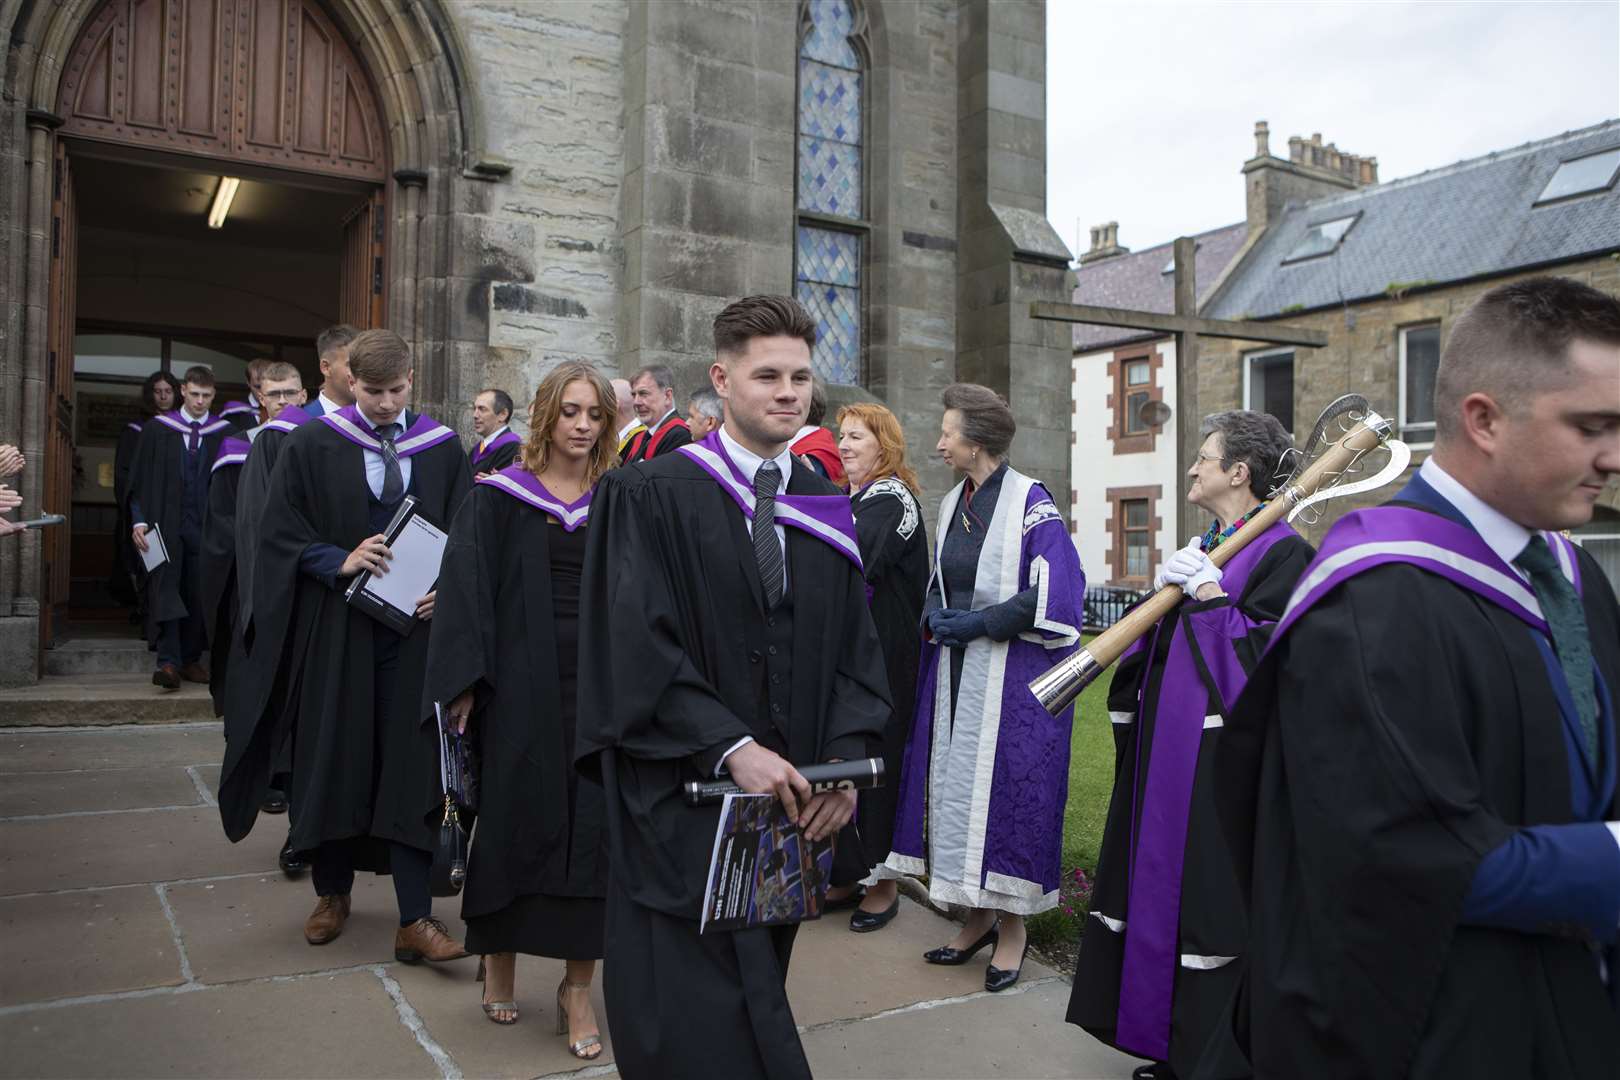 The graduates file past Princess Anne as they leave the church.